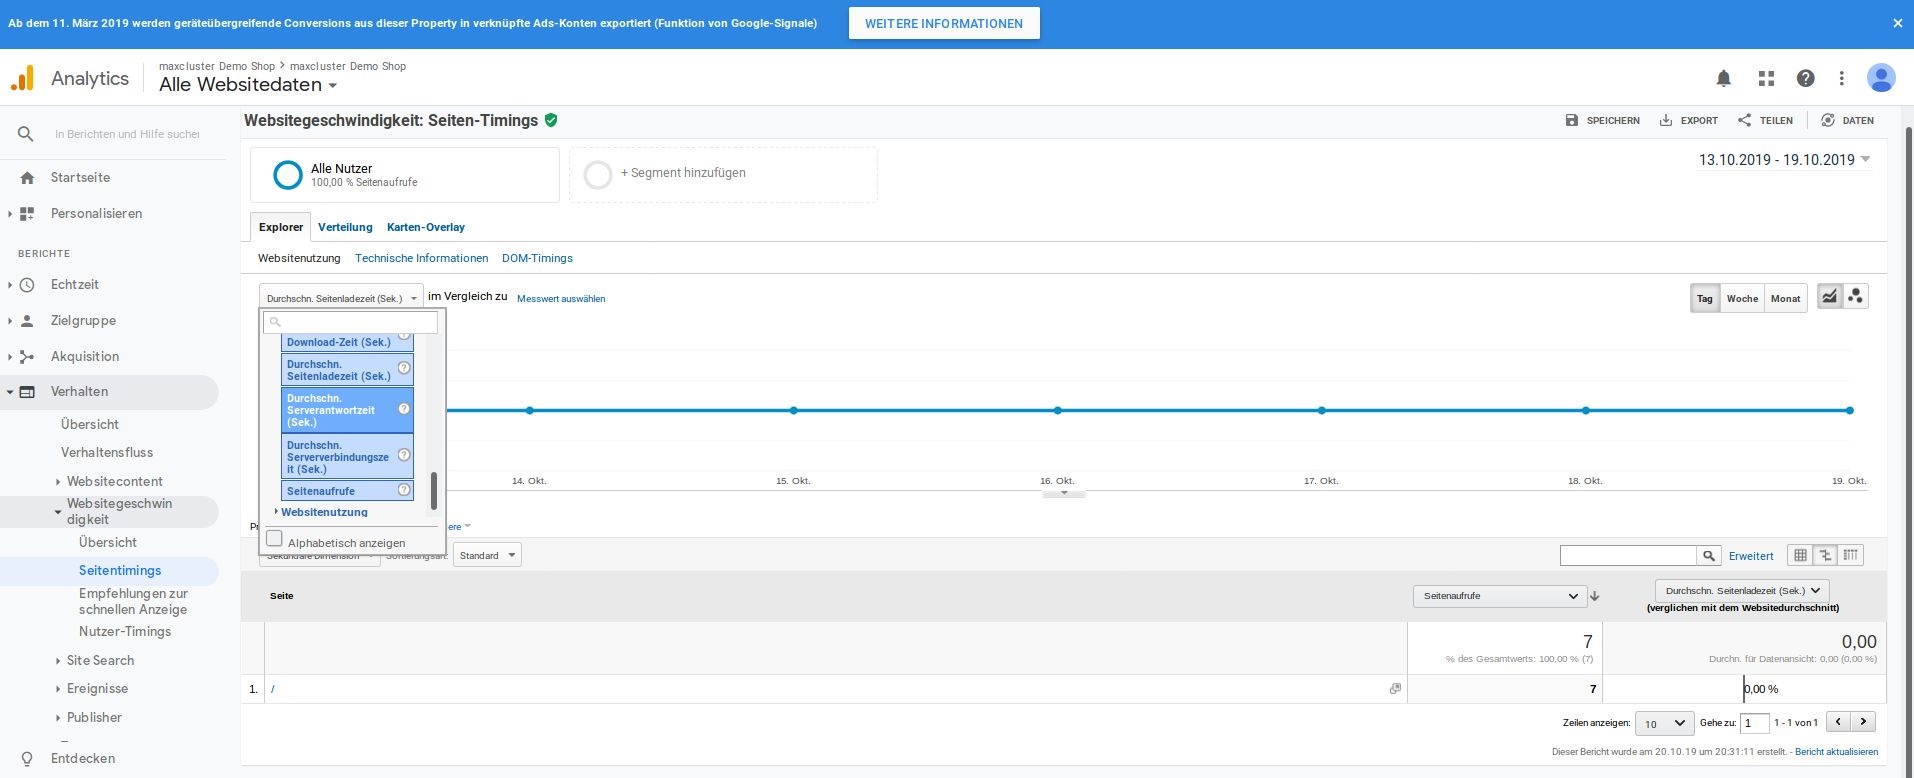 Google Analytics enables the analysis of various load time metrics